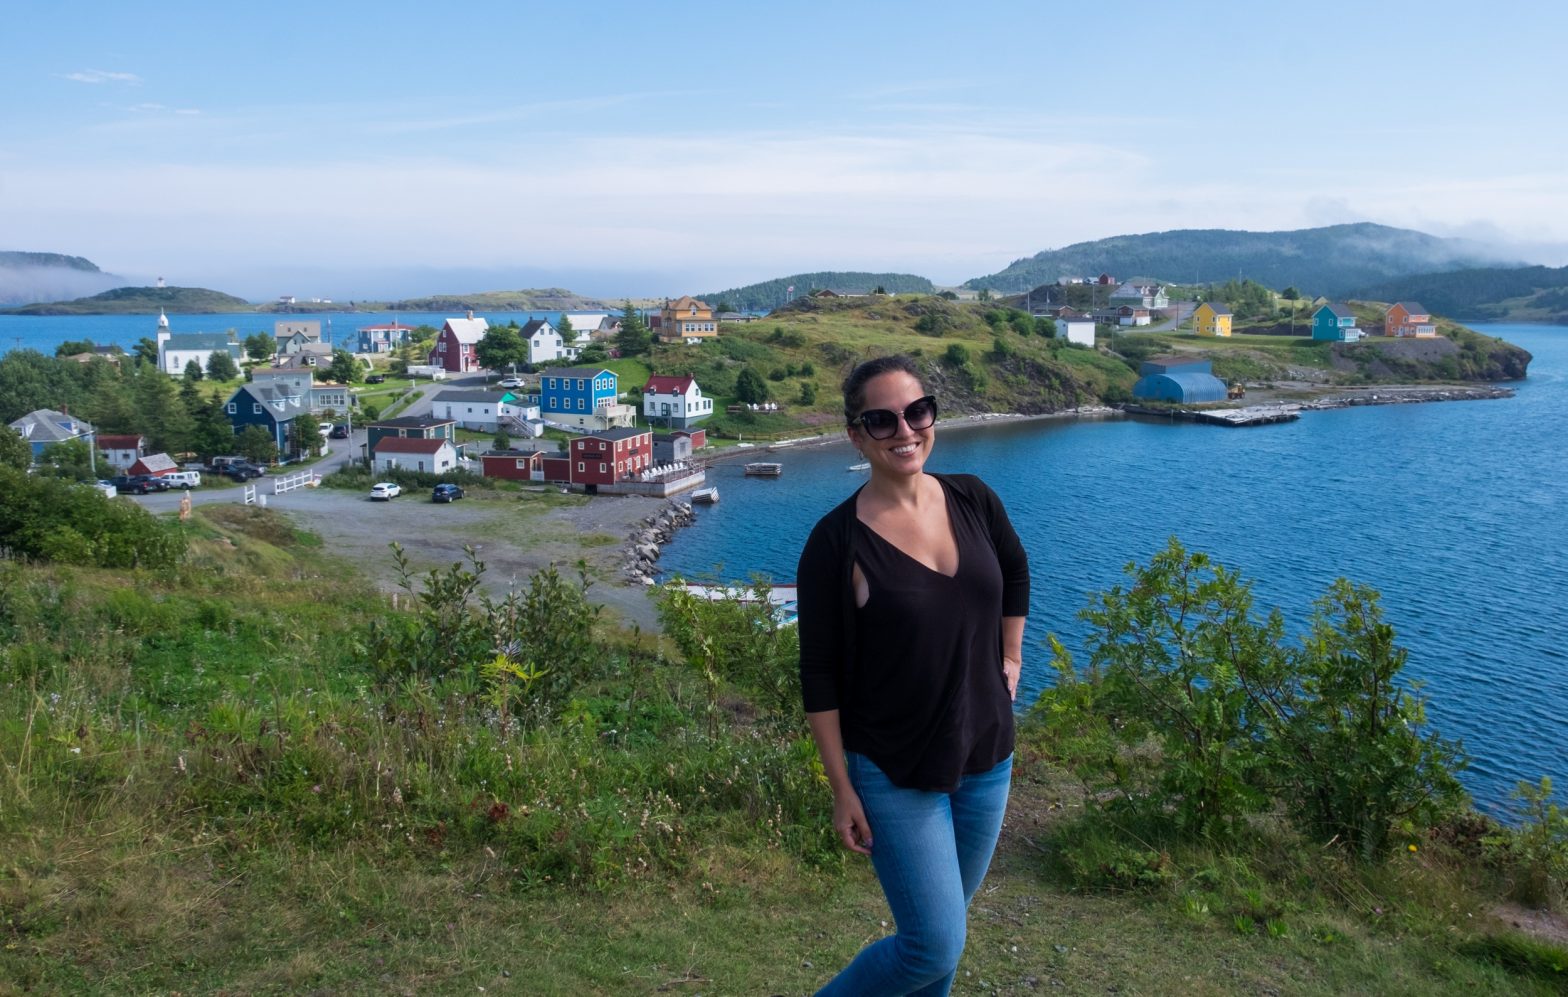 Travel to Newfoundland, Canada, and You’ll Never Want to Leave